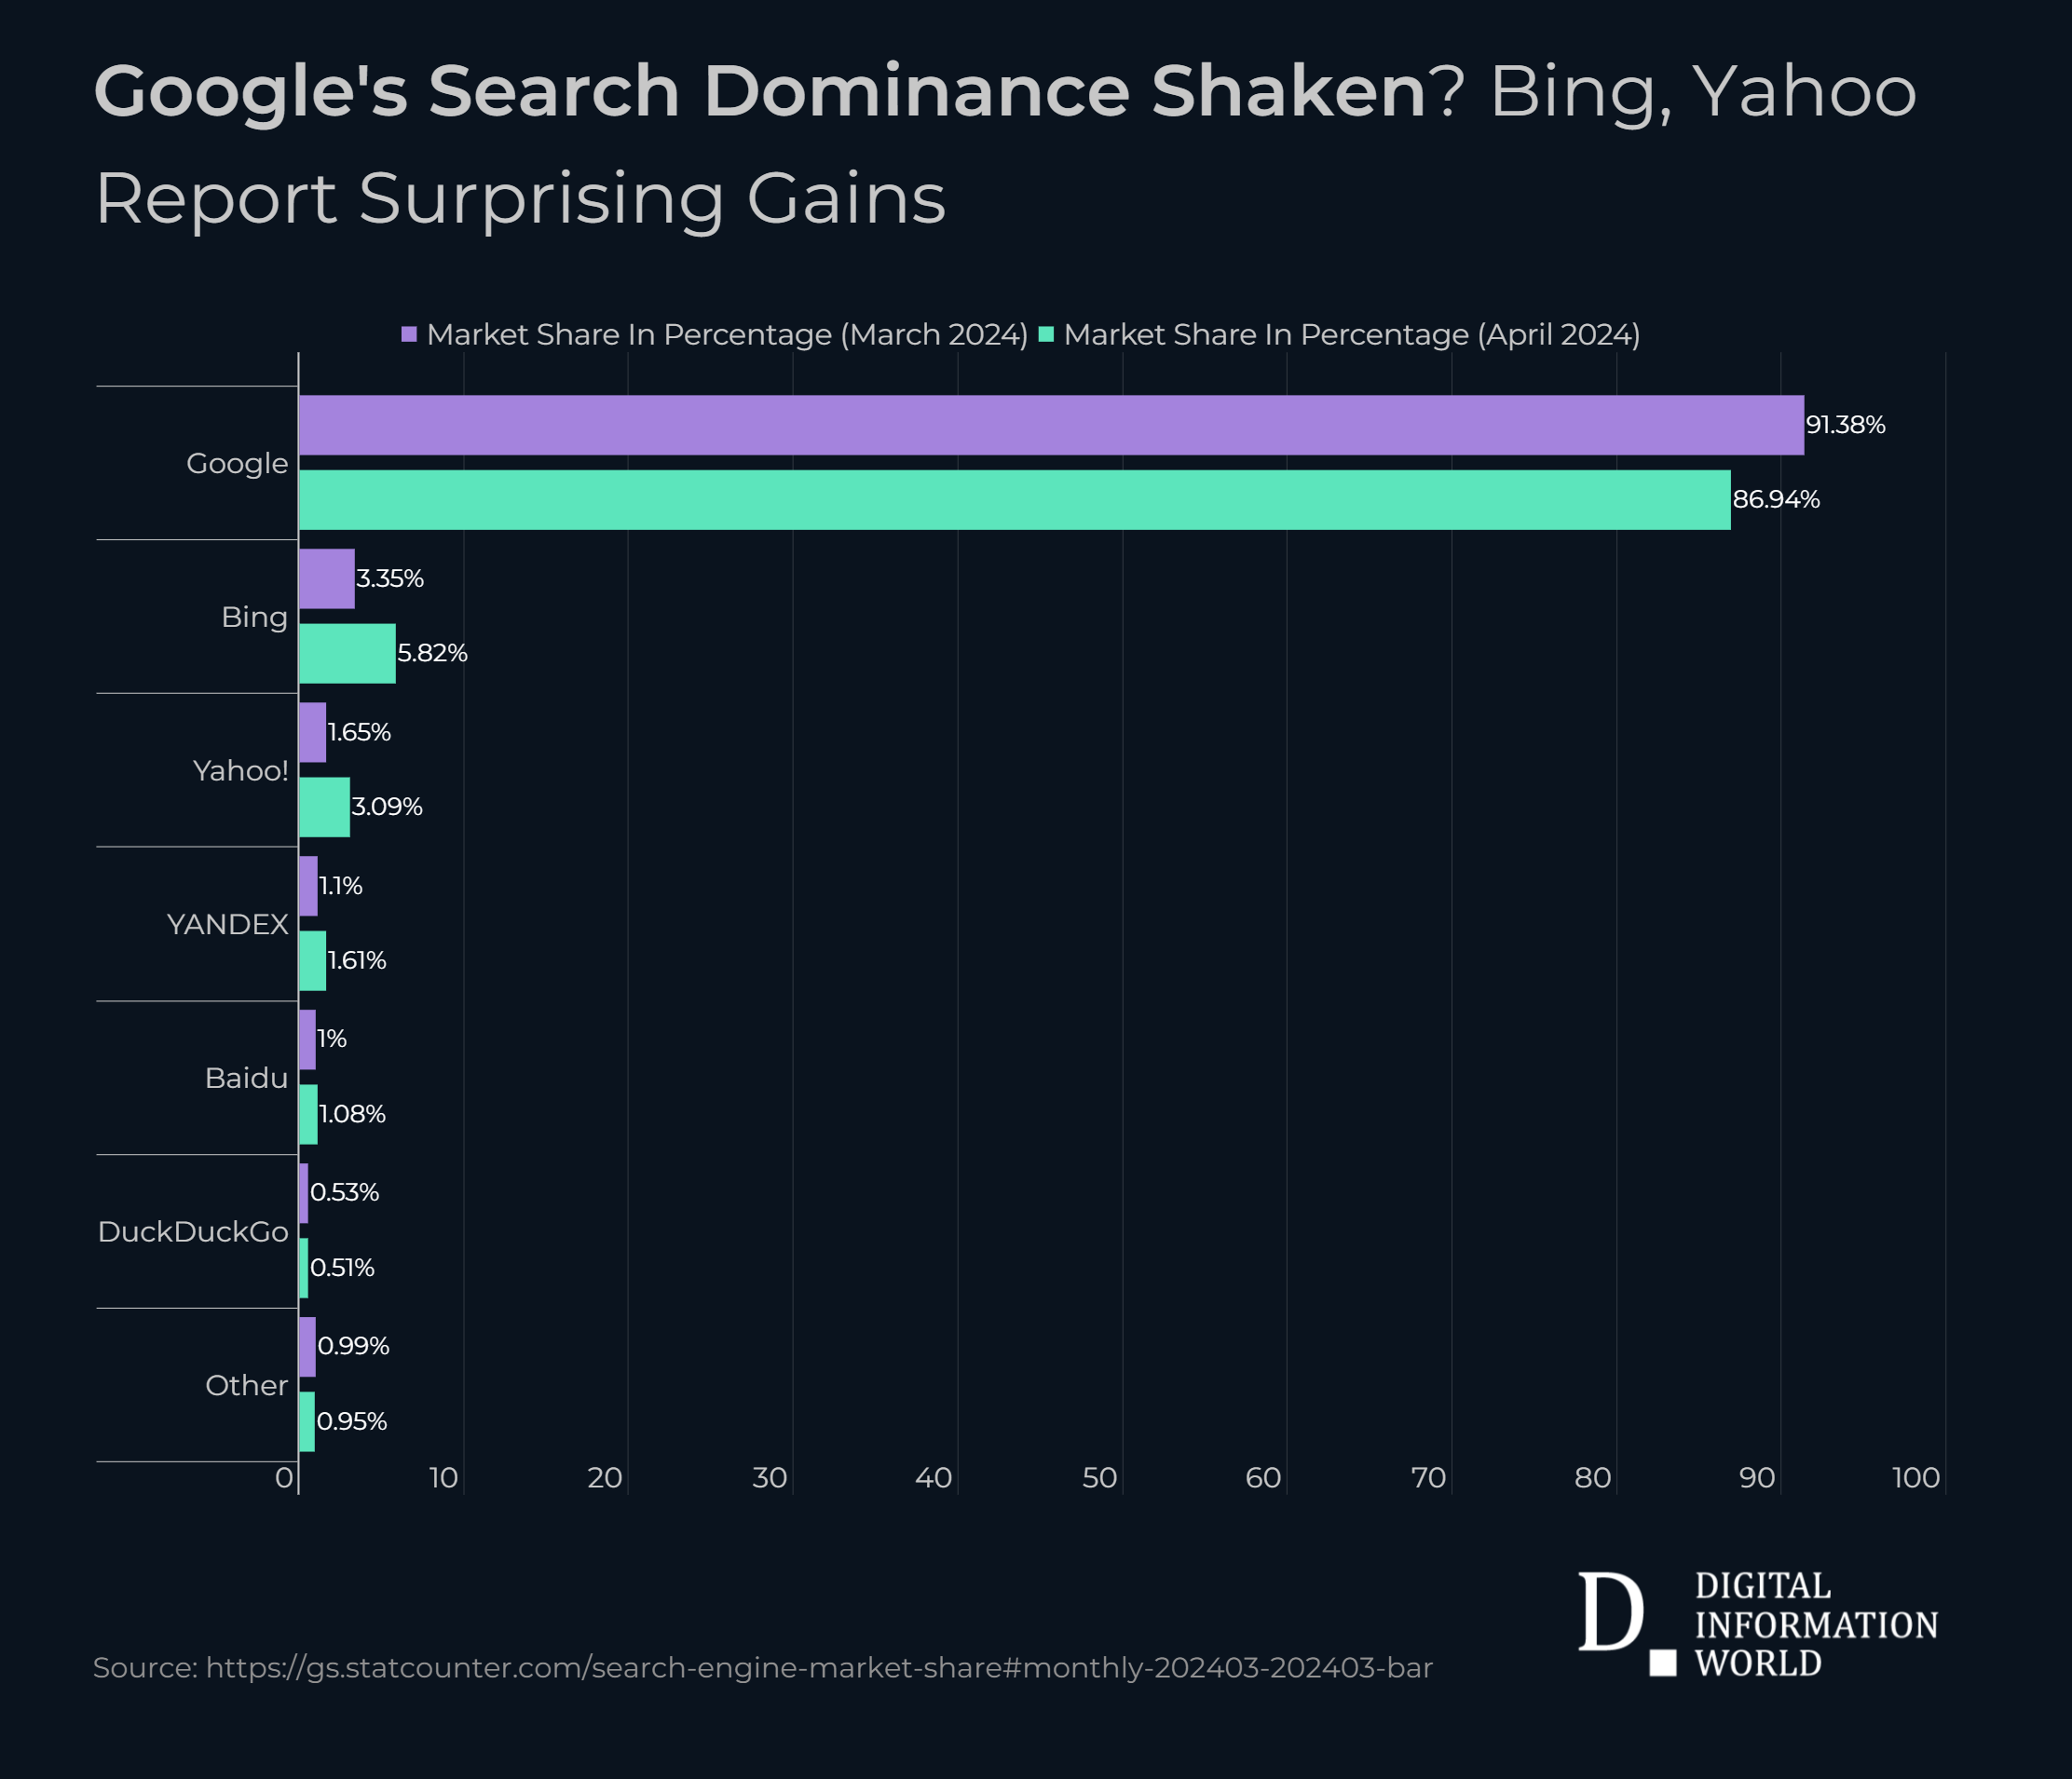 Skepticism arises over the rapid growth of Bing and Yahoo in just one month, with critics questioning the accuracy of the data.